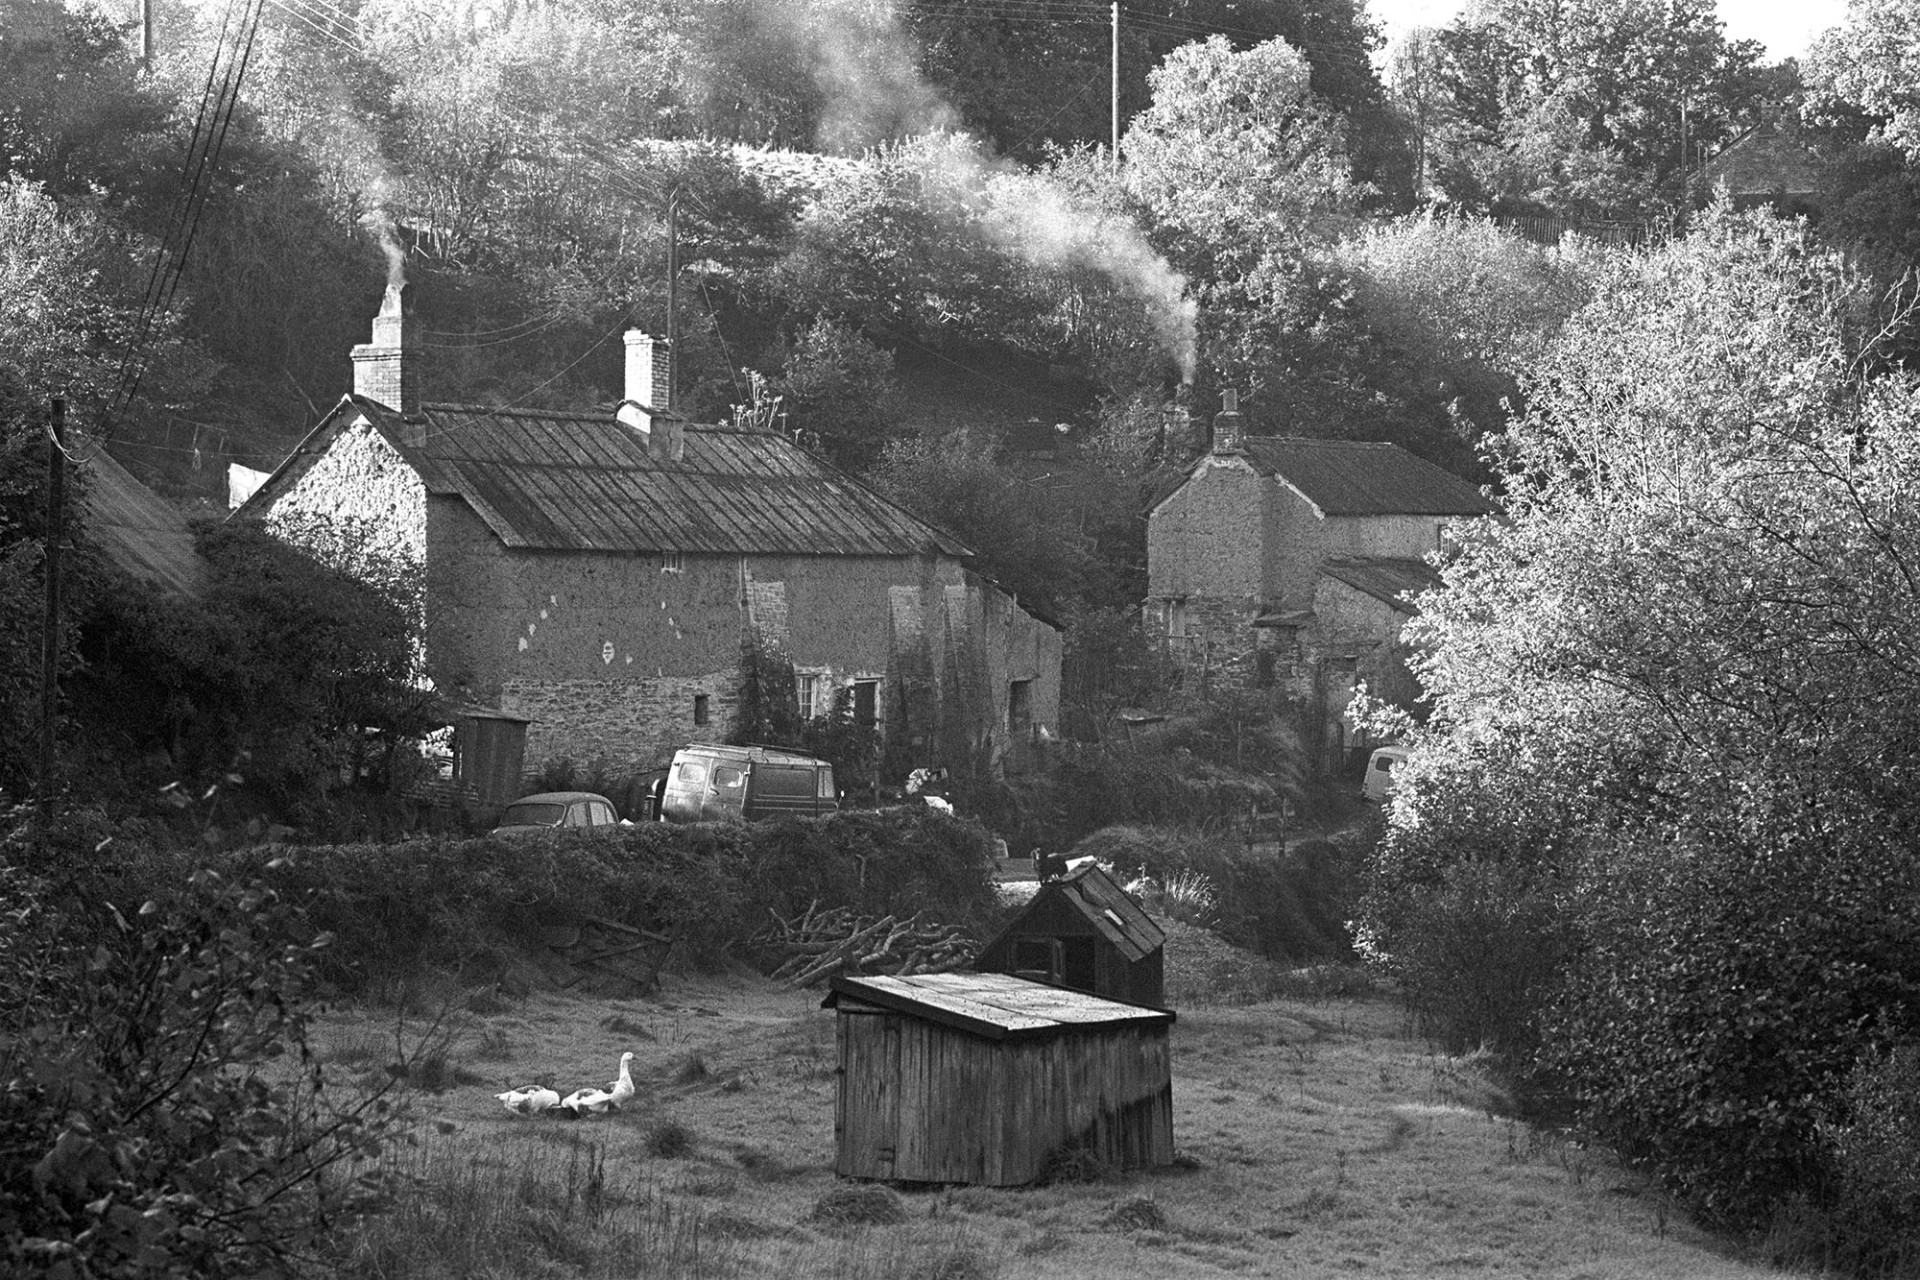 View of cottages, early morning with geese, trees, home of Archie Parkhouse.
[Two cottages in the early morning light at Millhams, Dolton, one of which belongs to Archie Parkhouse. Smoke is rising from the chimneys. Two poultry sheds and three geese are in a field in the foreground.]